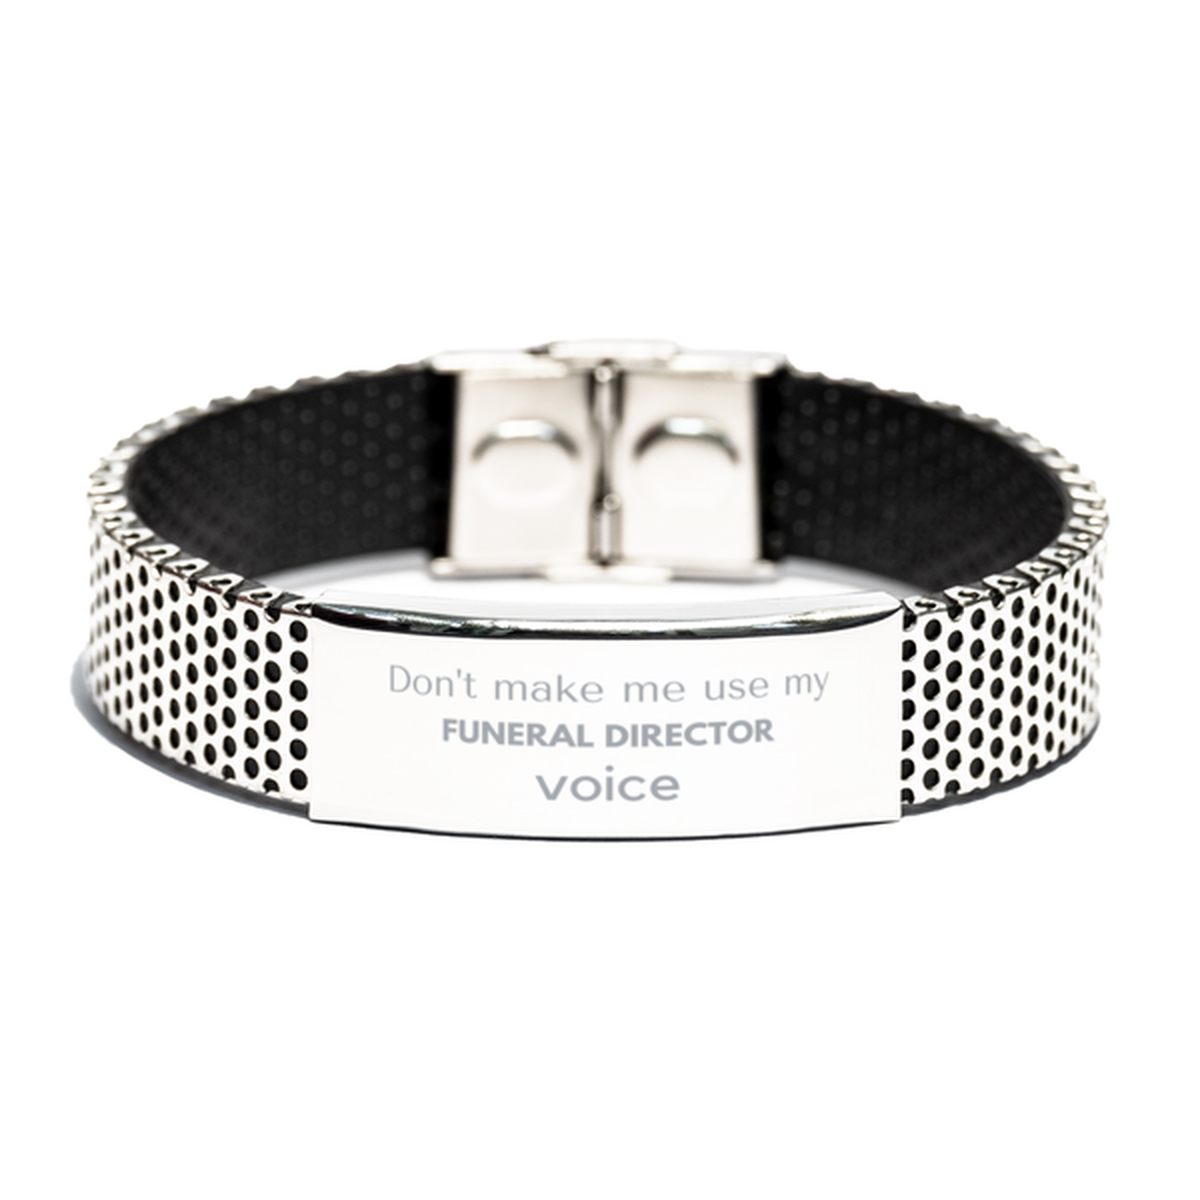 Don't make me use my Funeral Director voice, Sarcasm Funeral Director Gifts, Christmas Funeral Director Stainless Steel Bracelet Birthday Unique Gifts For Funeral Director Coworkers, Men, Women, Colleague, Friends